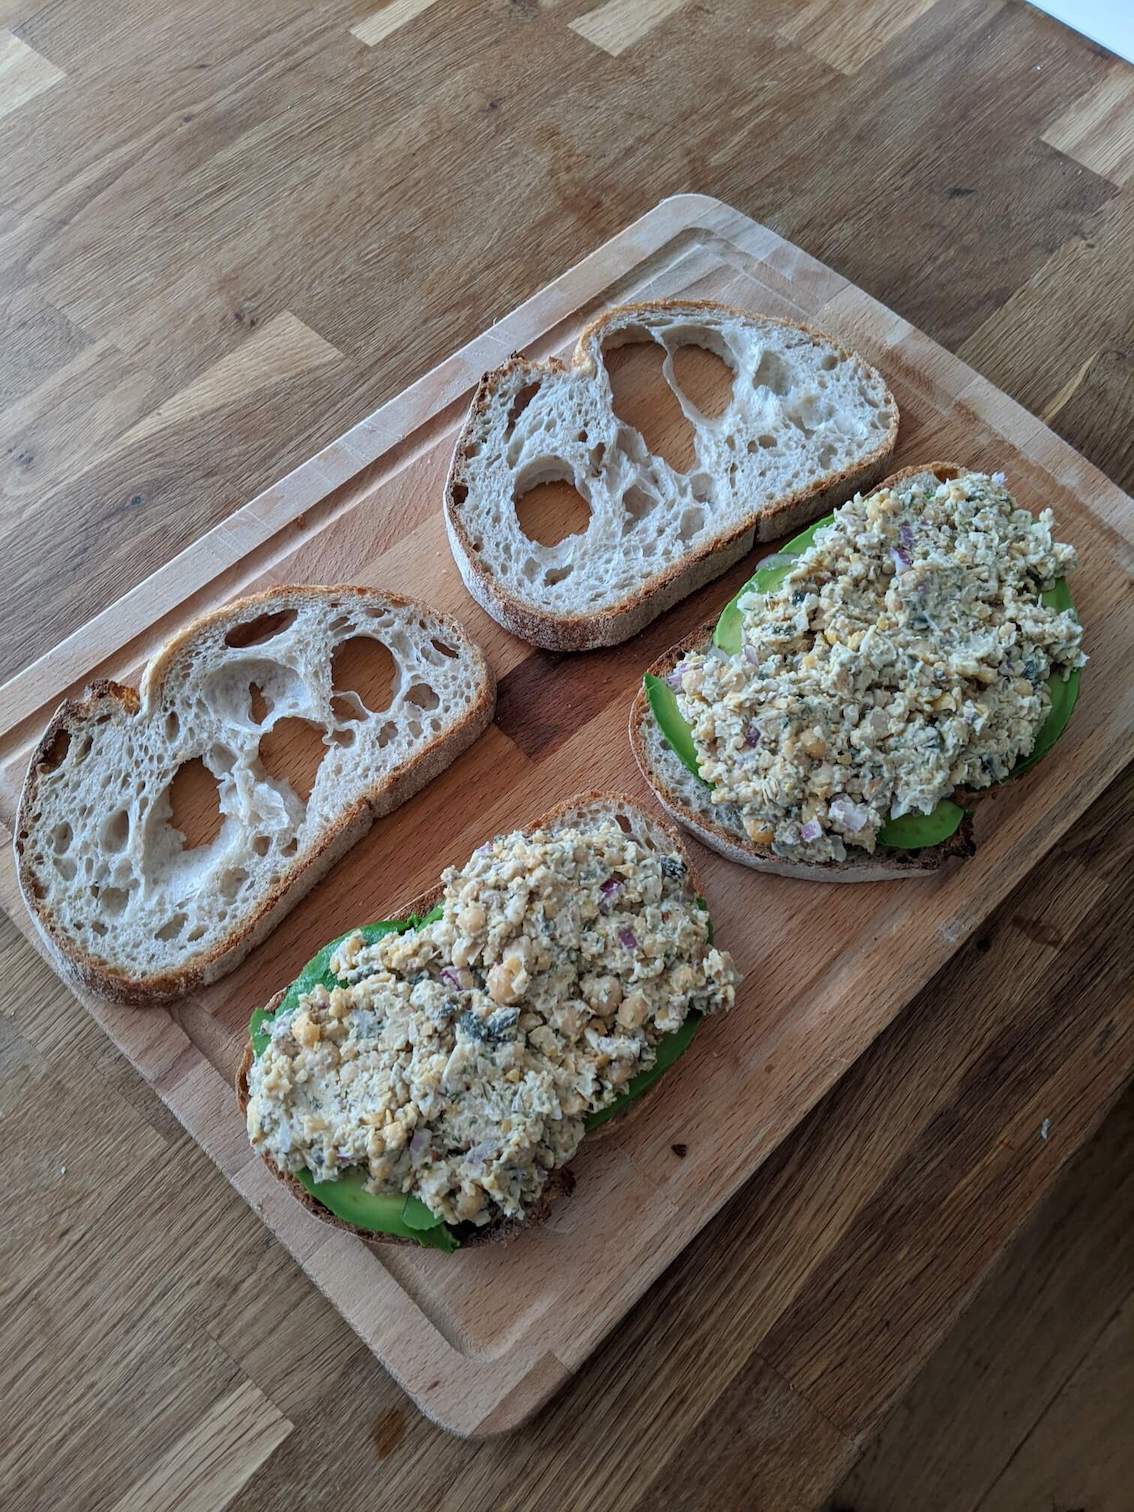 Chickpea tuna and avocado sandwich (deconstructed)